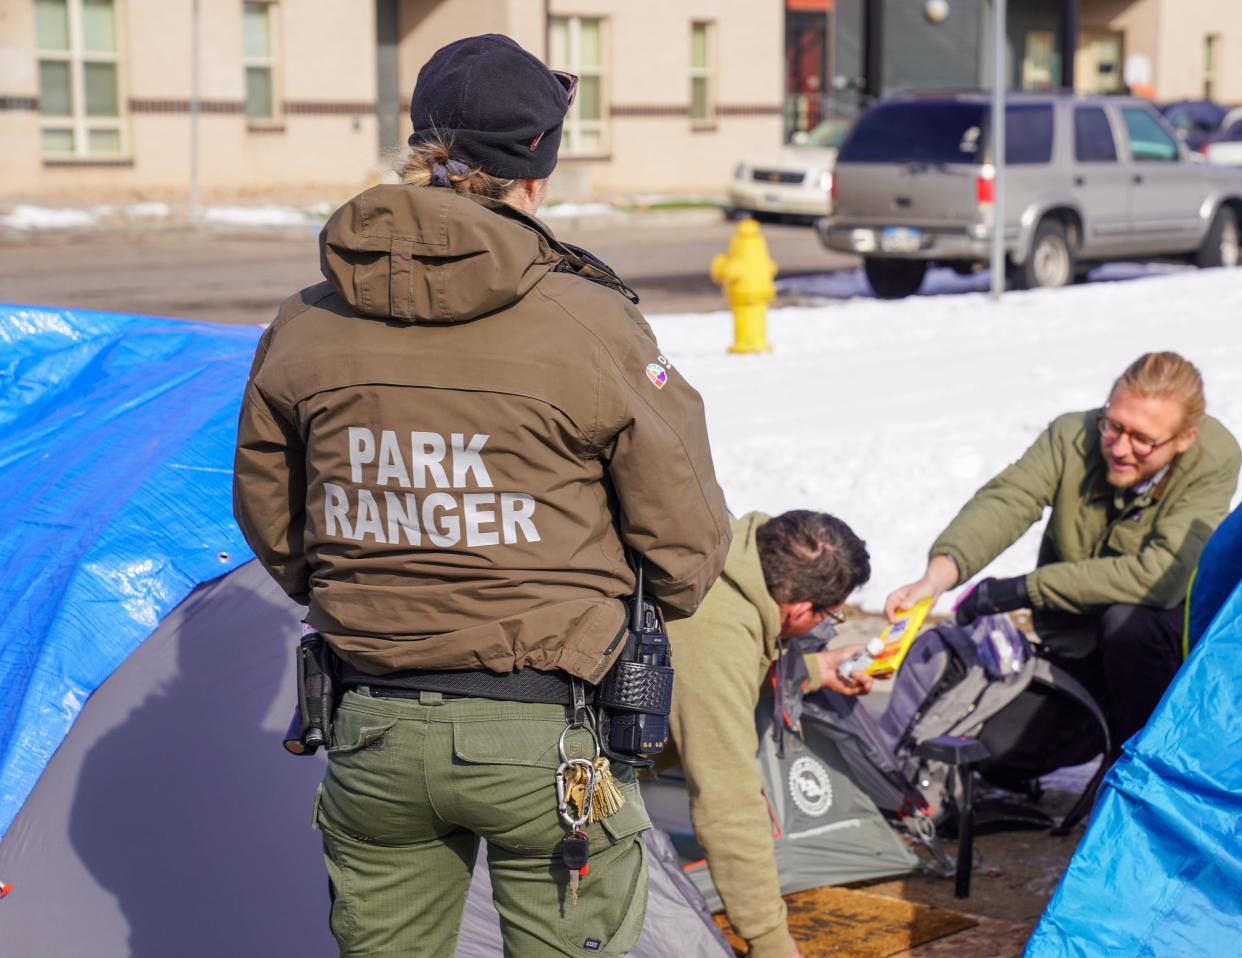 Denver park ranger Jodie Marozas watches as Tom Kaiser, a mental health clinician with WellPower, speaks with an unhoused man living in a tent near a city park in below-freezing weather.